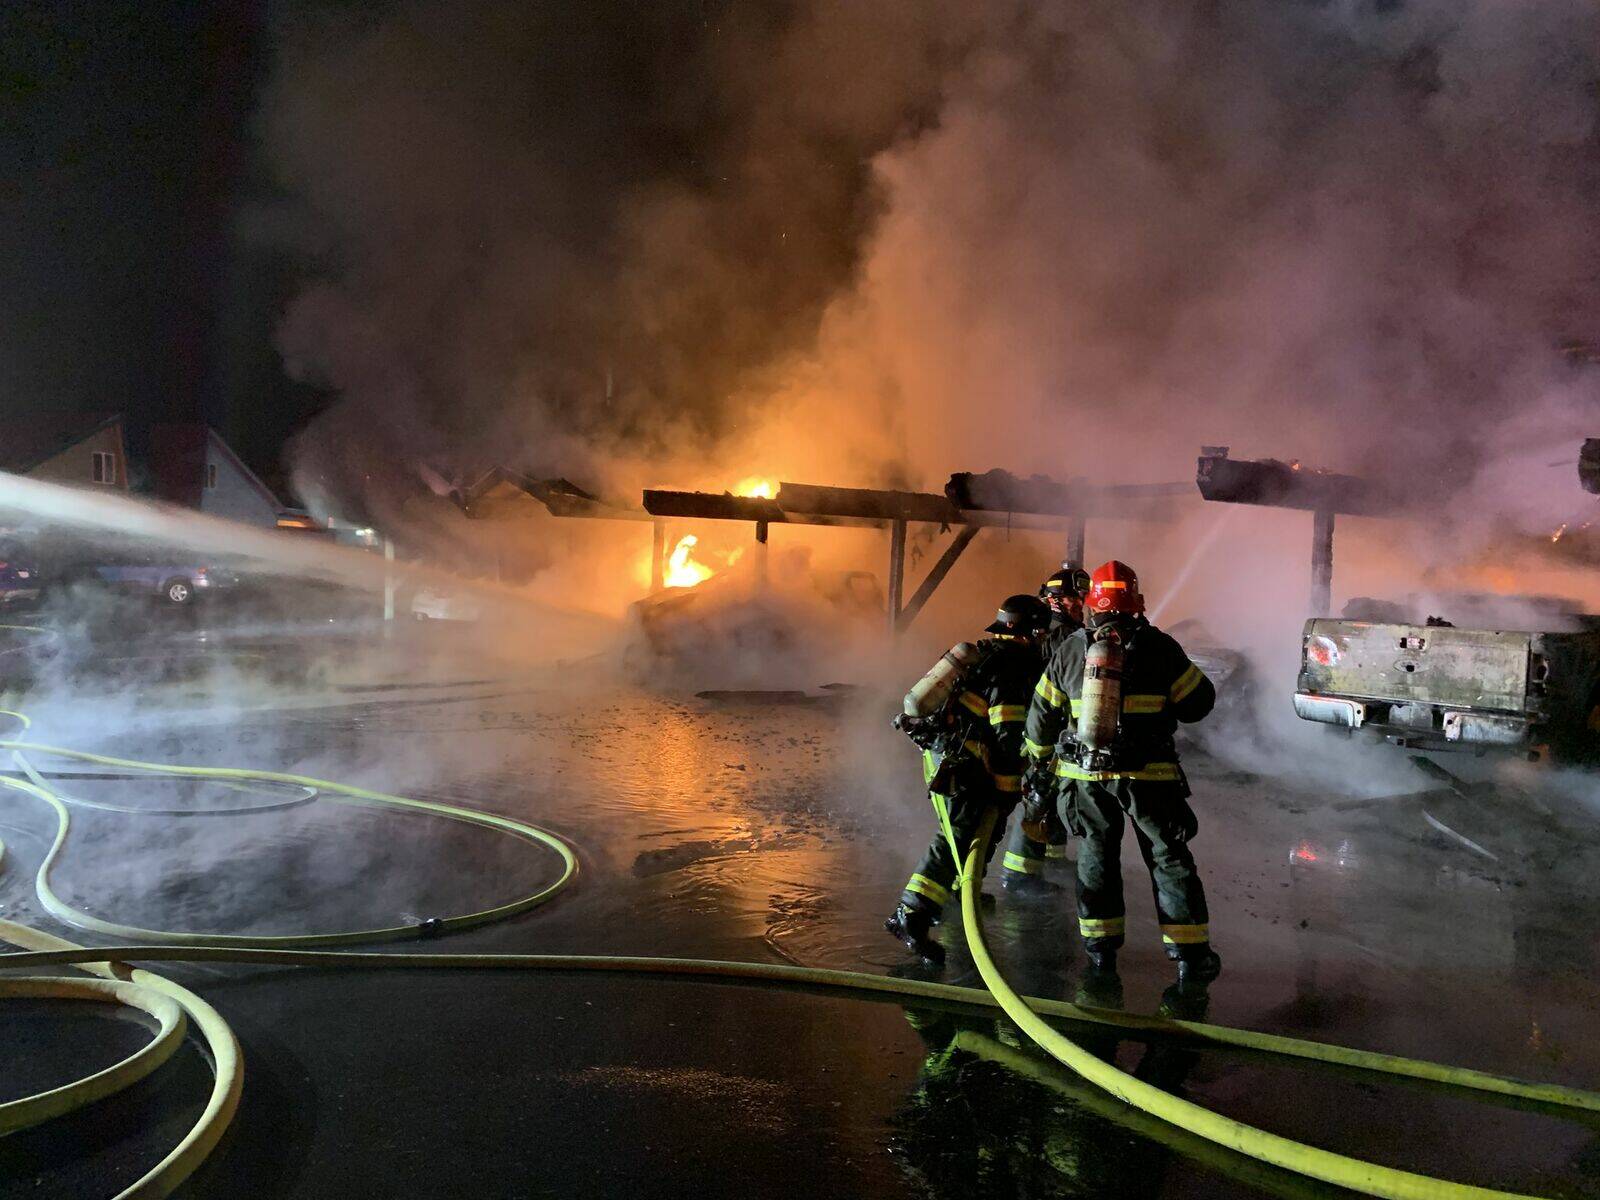 Firefighters spray water at a carport engulfed in flames at the Riverfront Apartment complex on 8th Street Southeast in Auburn. The apartment complex was engulfed in a three-alarm fire Sunday night. Photo courtesy of Valley Regional Fire Authority.